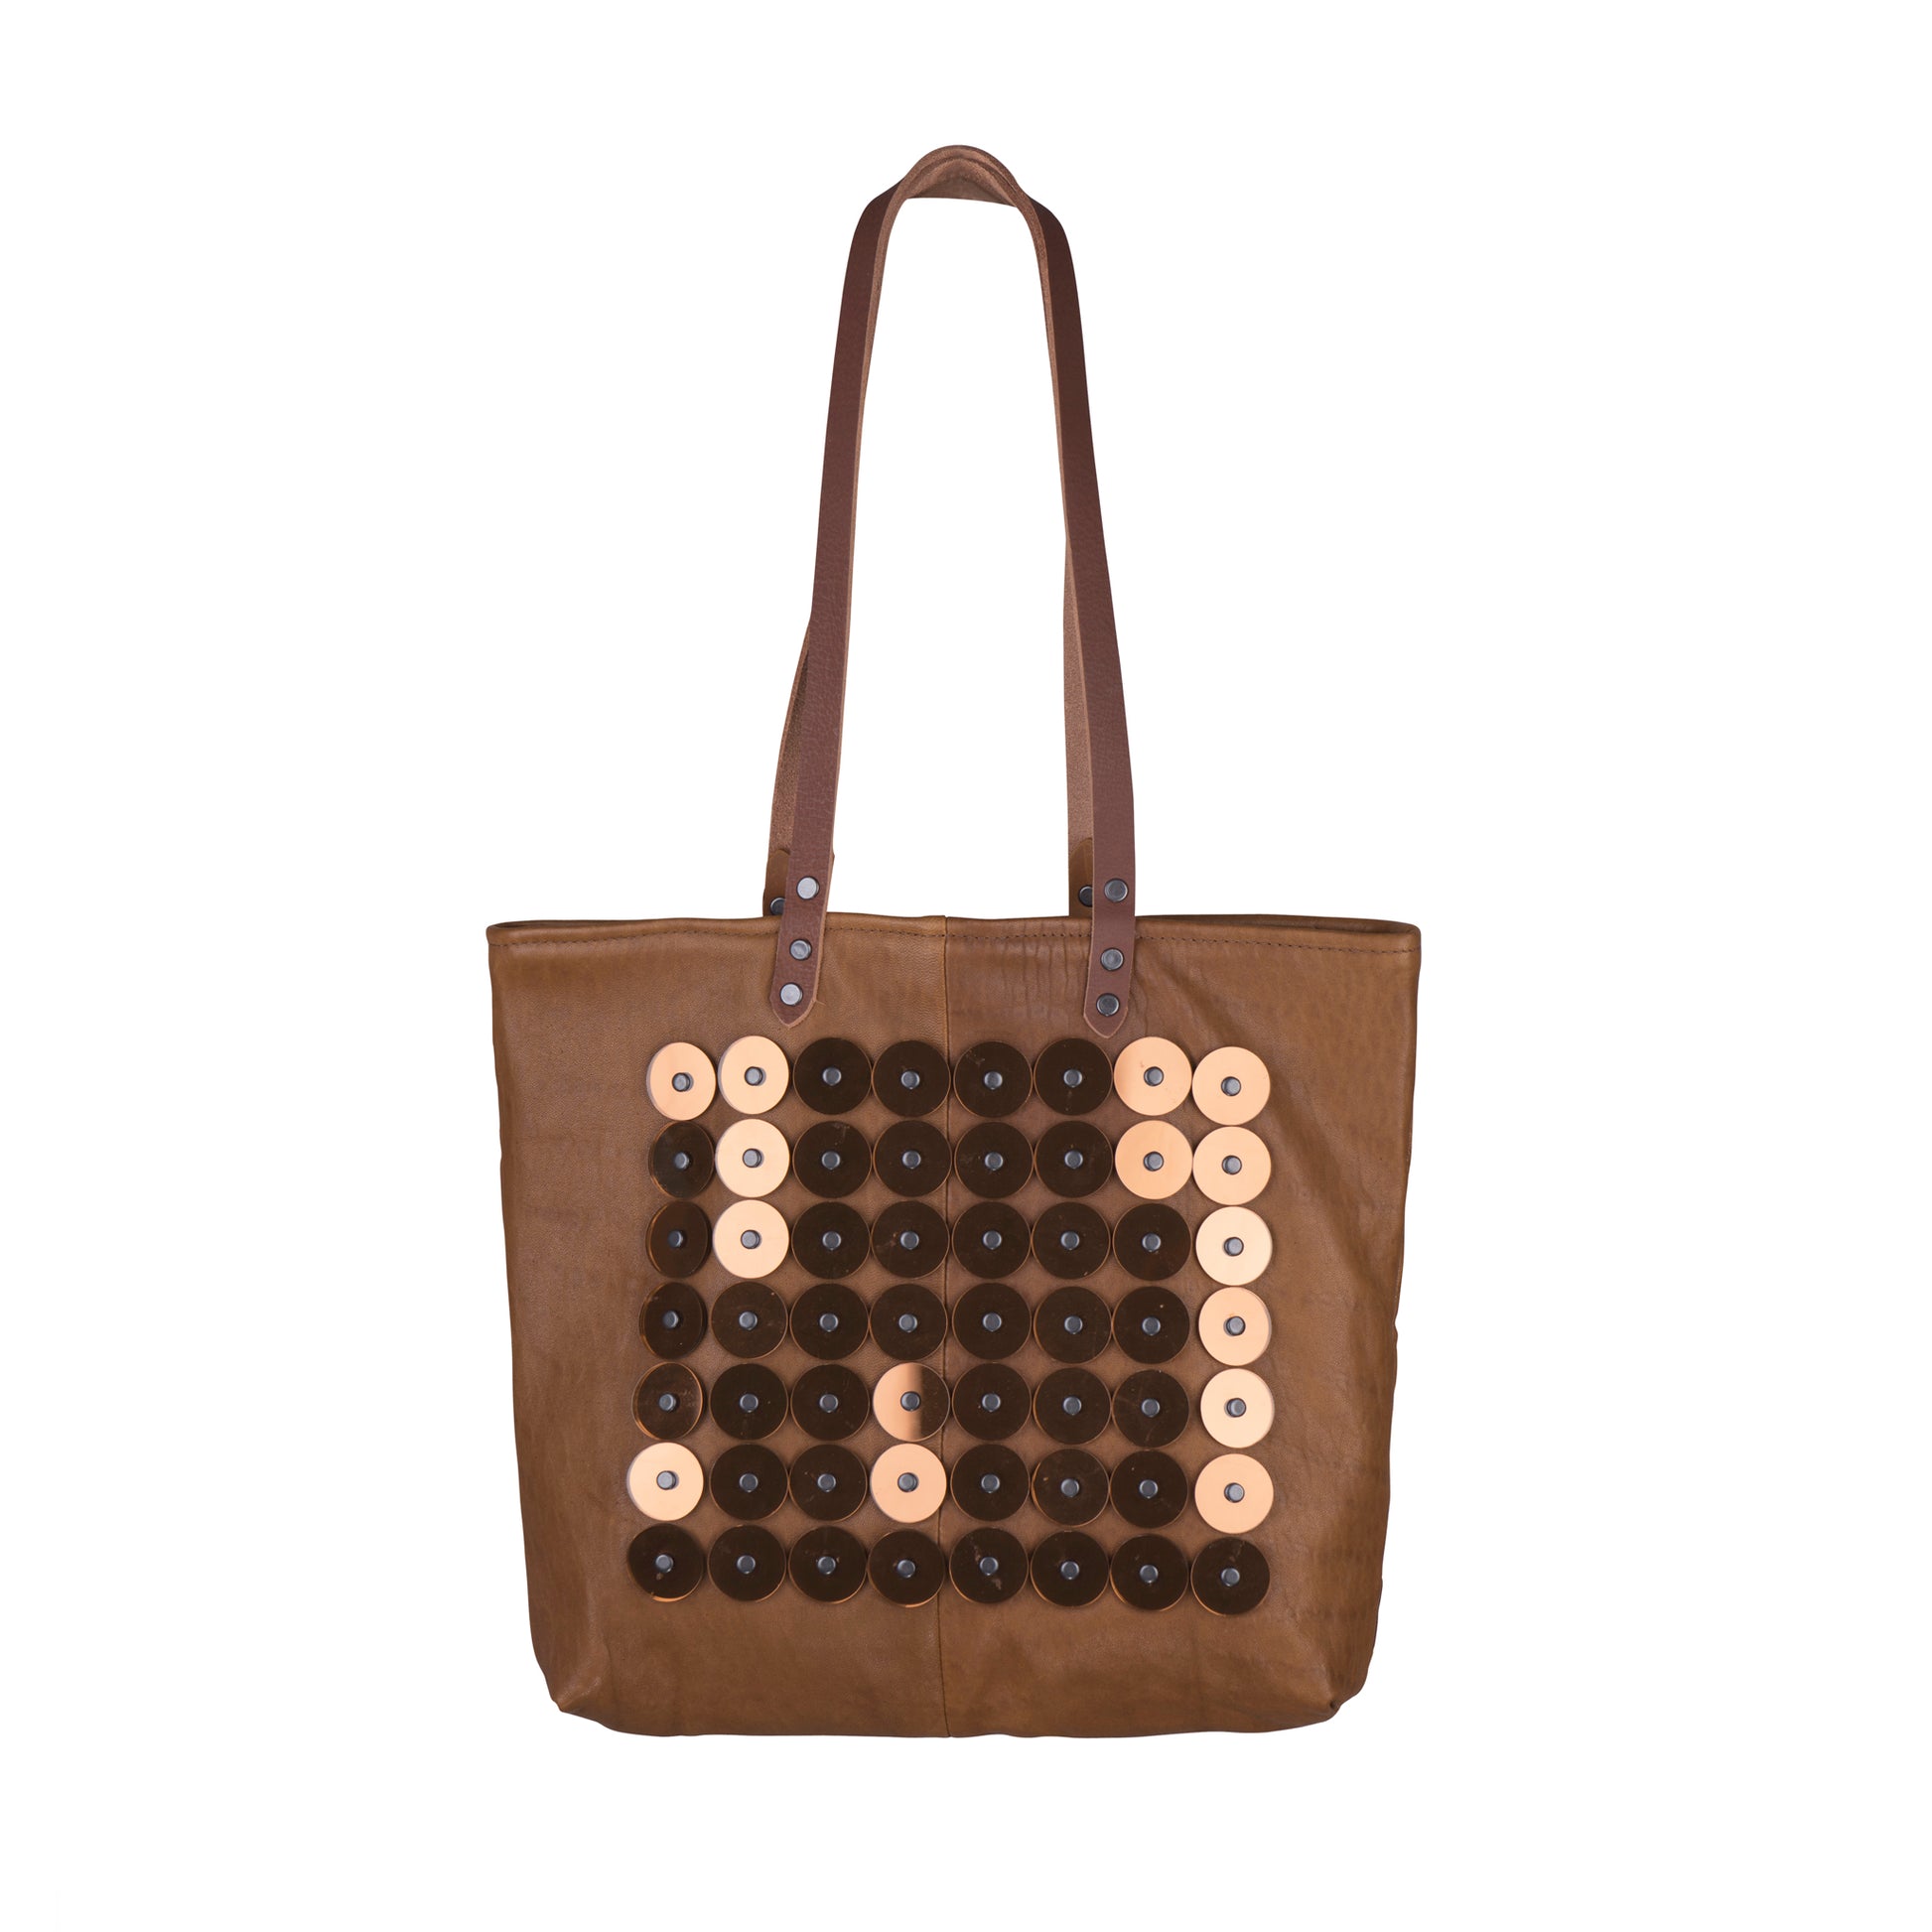 METANoIA tan recycled leather medium handbag with circle copper acrylic forms fashioned into a repetitive fashion with a smaller circle overlay on each form. 